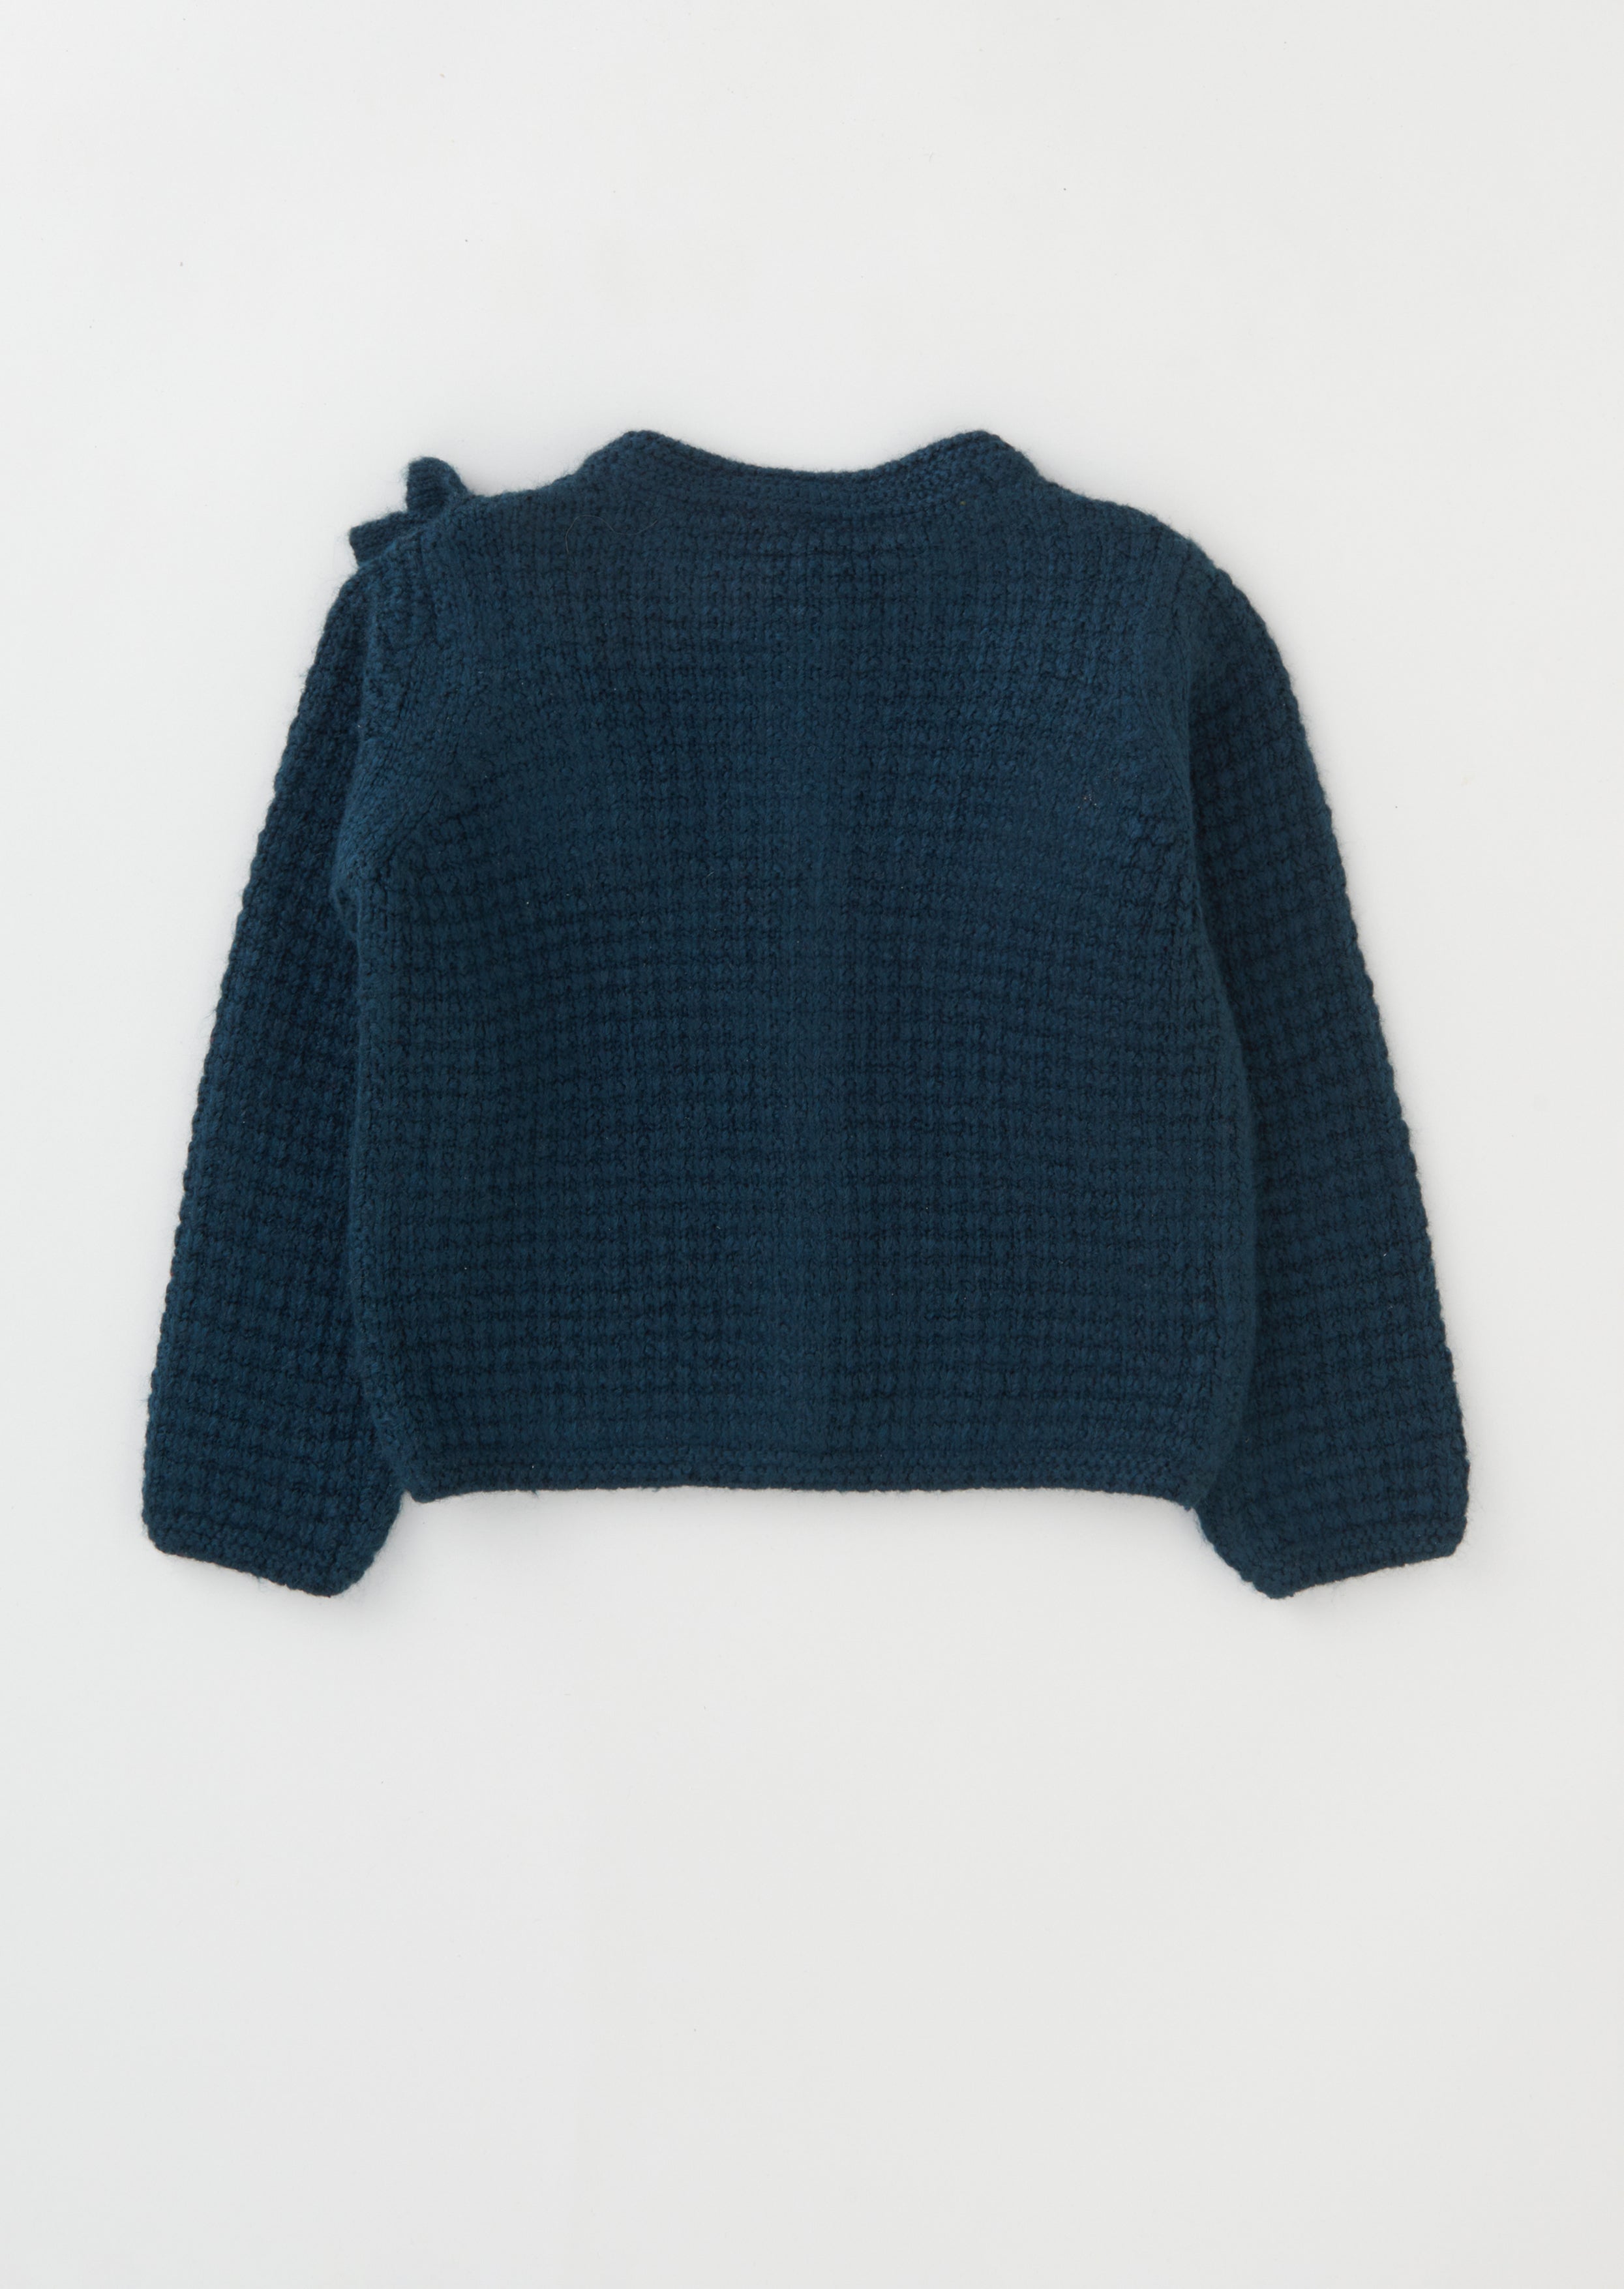 Girls Solid Navy Sweater with Frill Shoulder